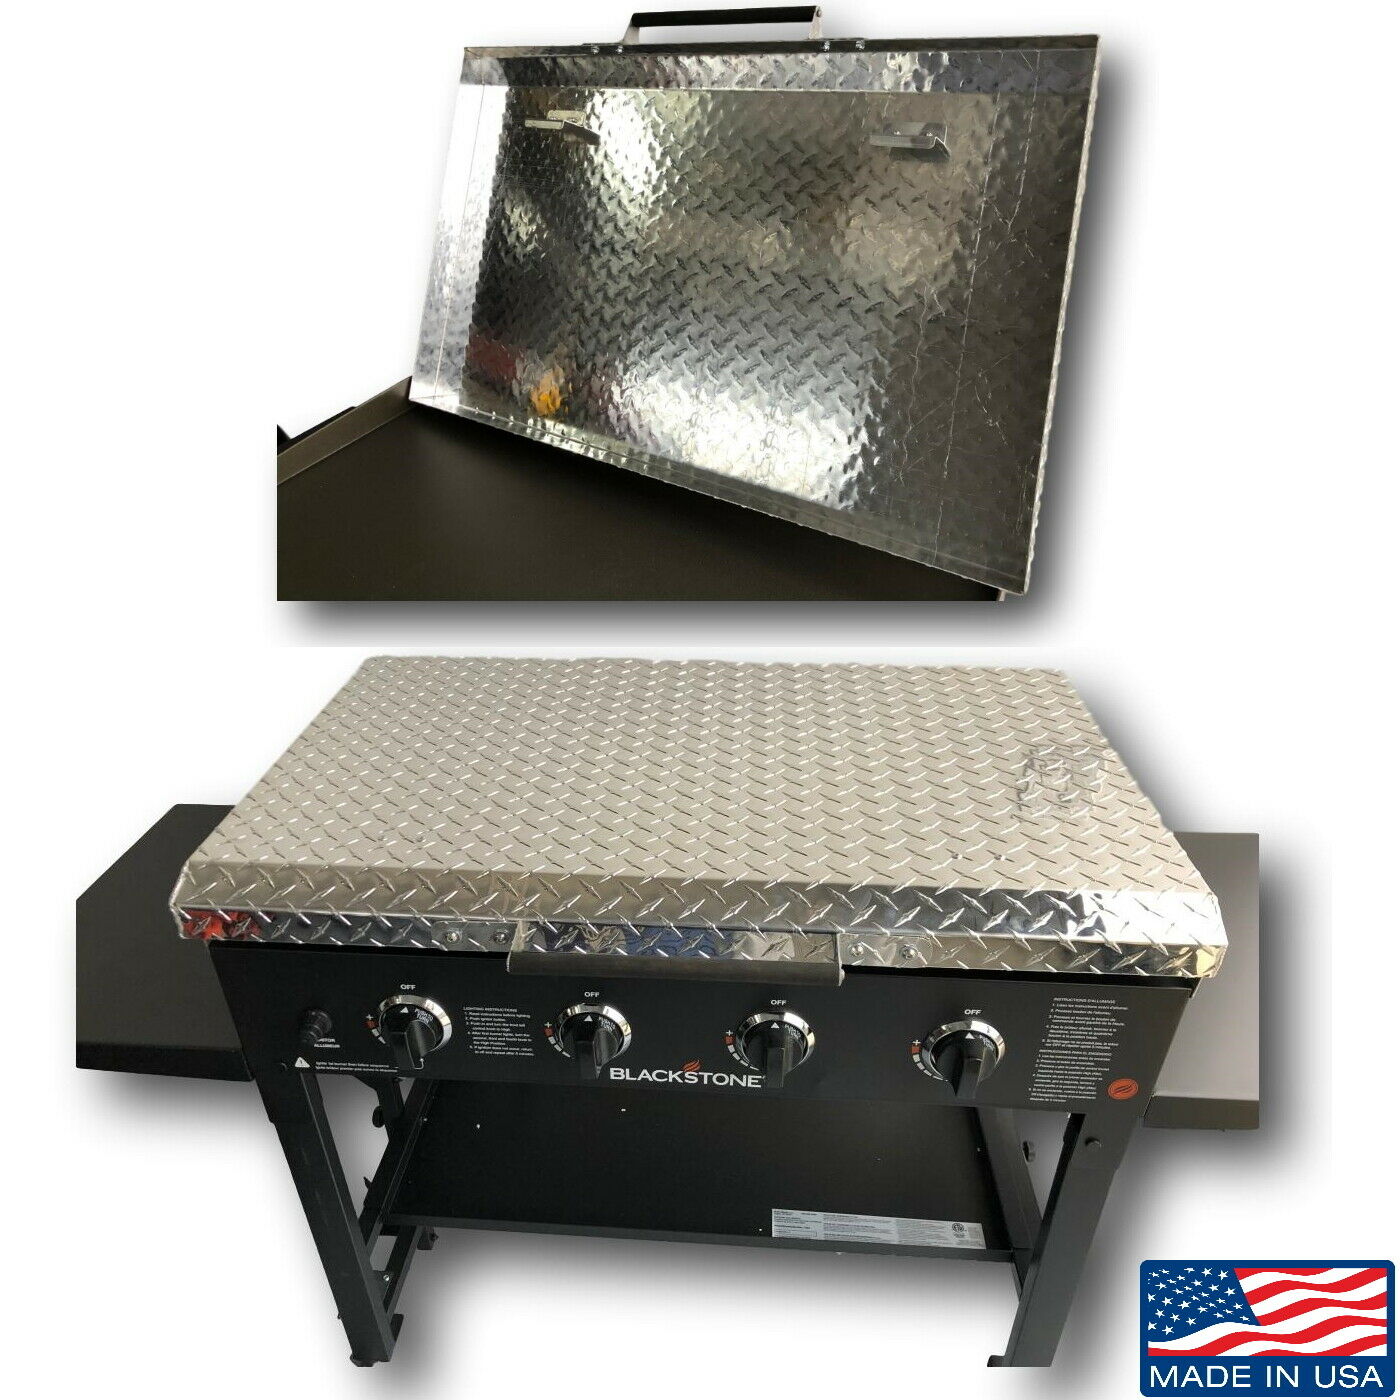 Diamond Plate Aluminum Lid Storage Cover For 36" Blackstone Griddle Made In Usa